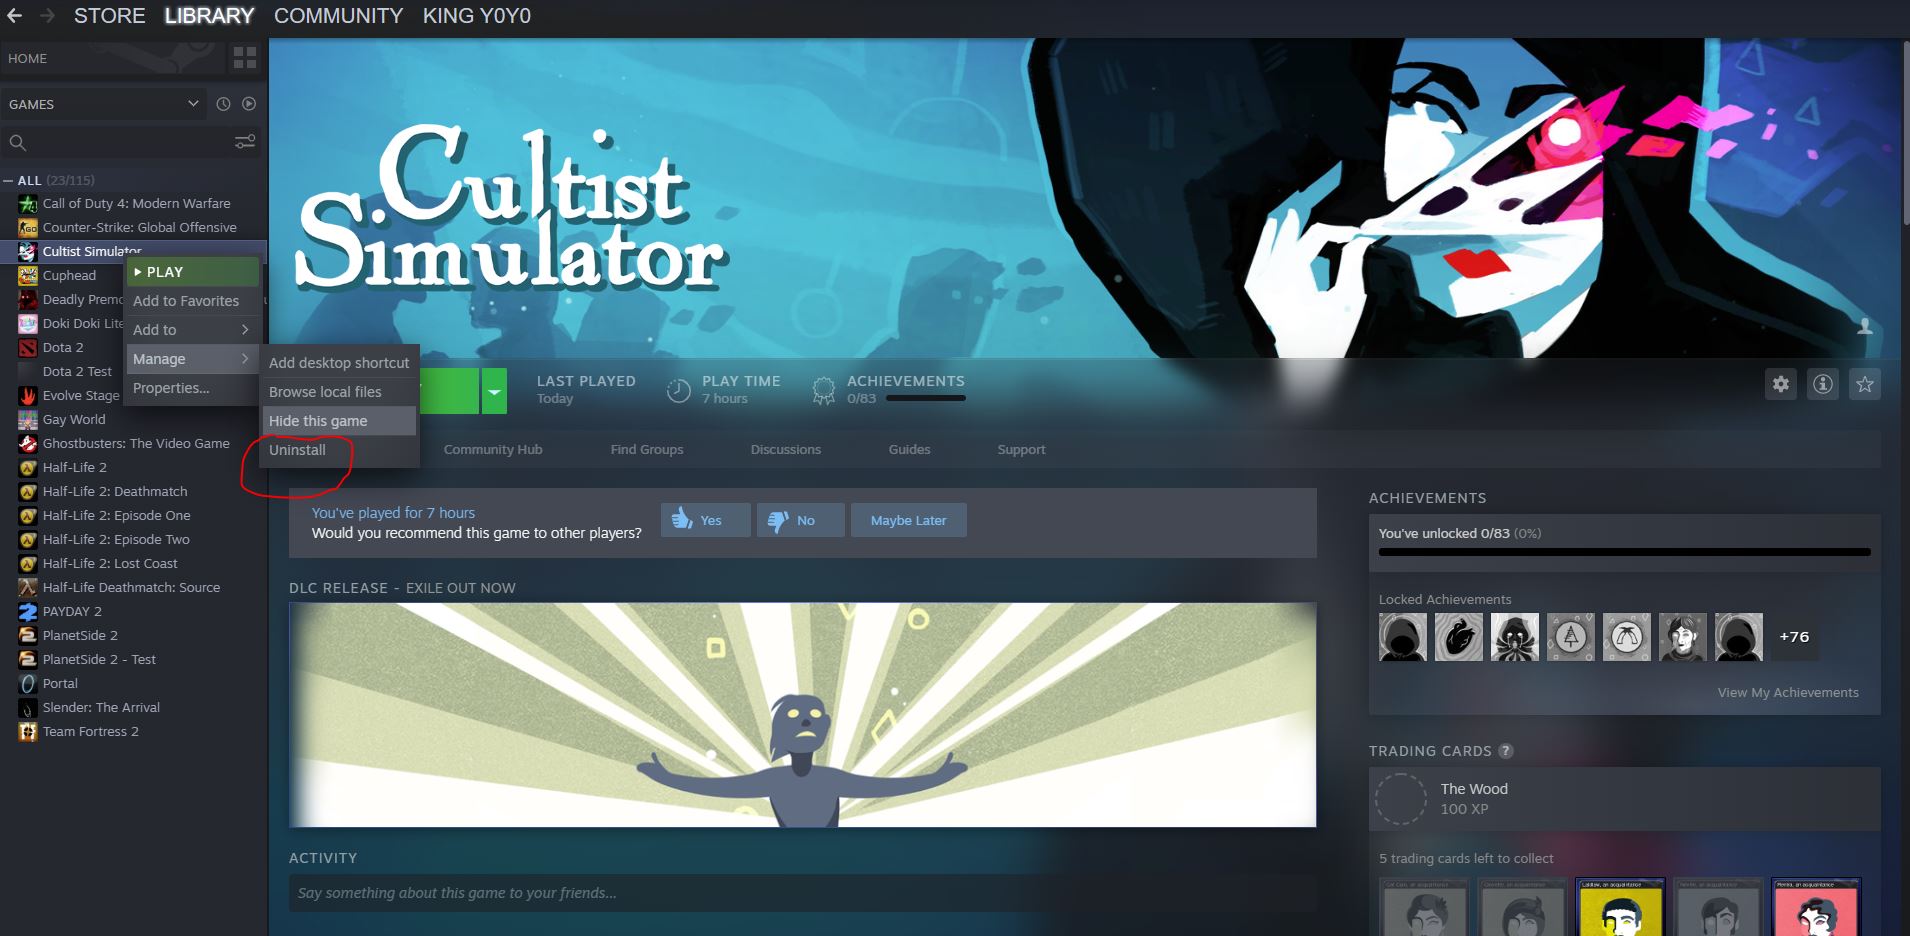 Steam's new policy will remove non-gaming videos from store